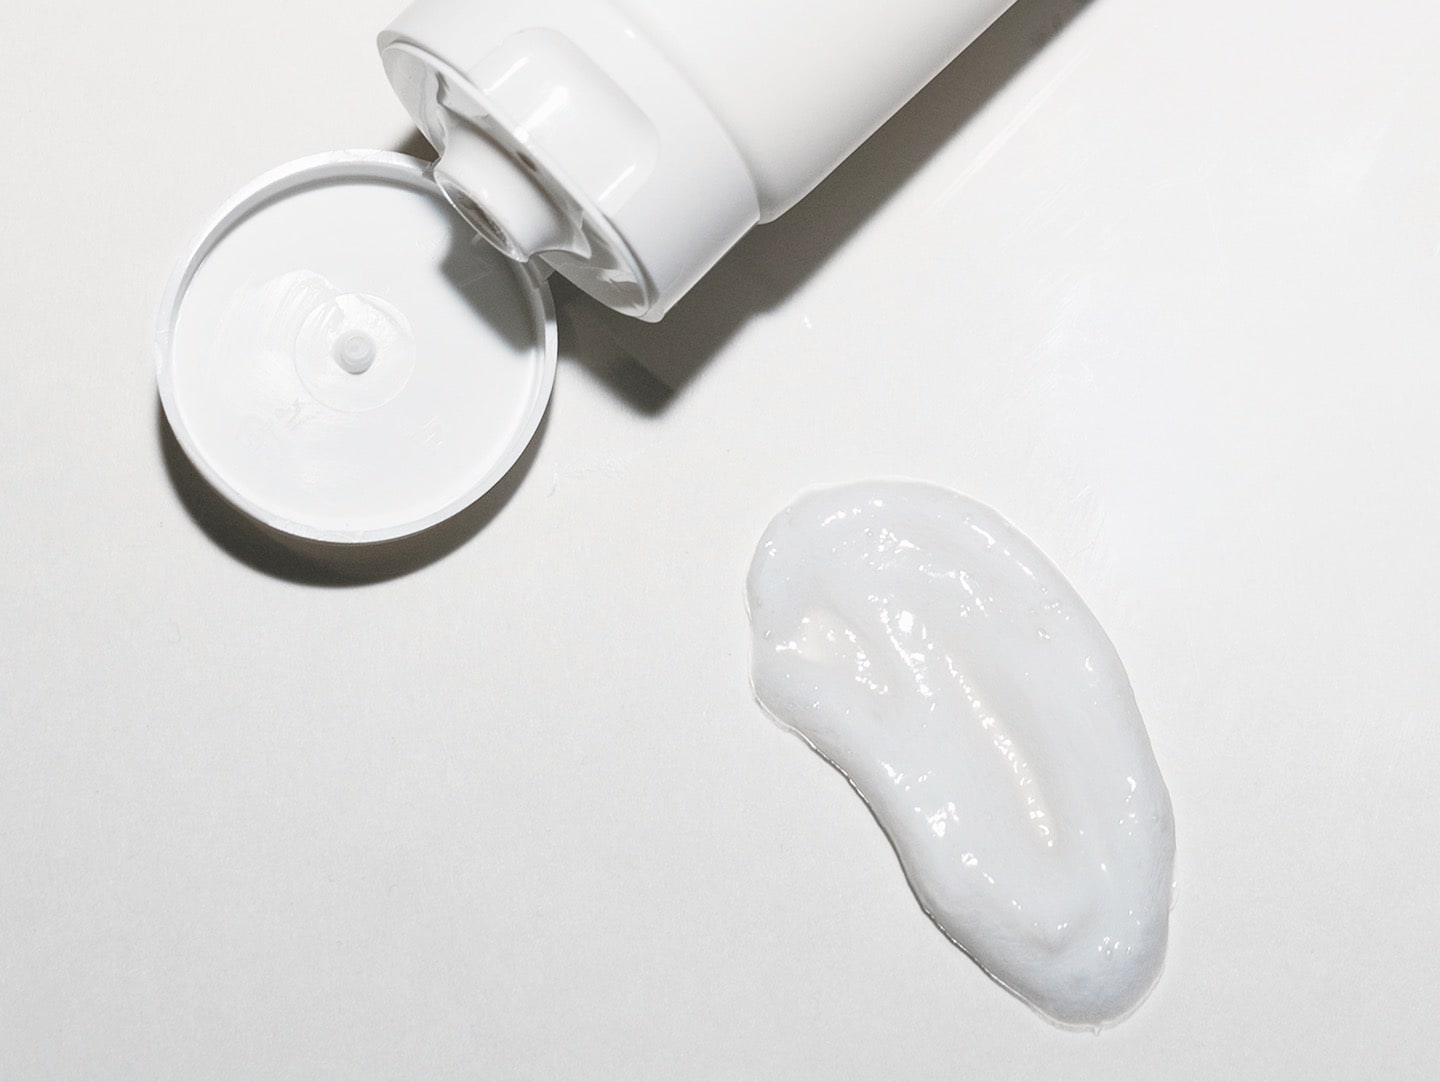 open cap of the hydrating cleanser bottle and a smear of the cleanser cream